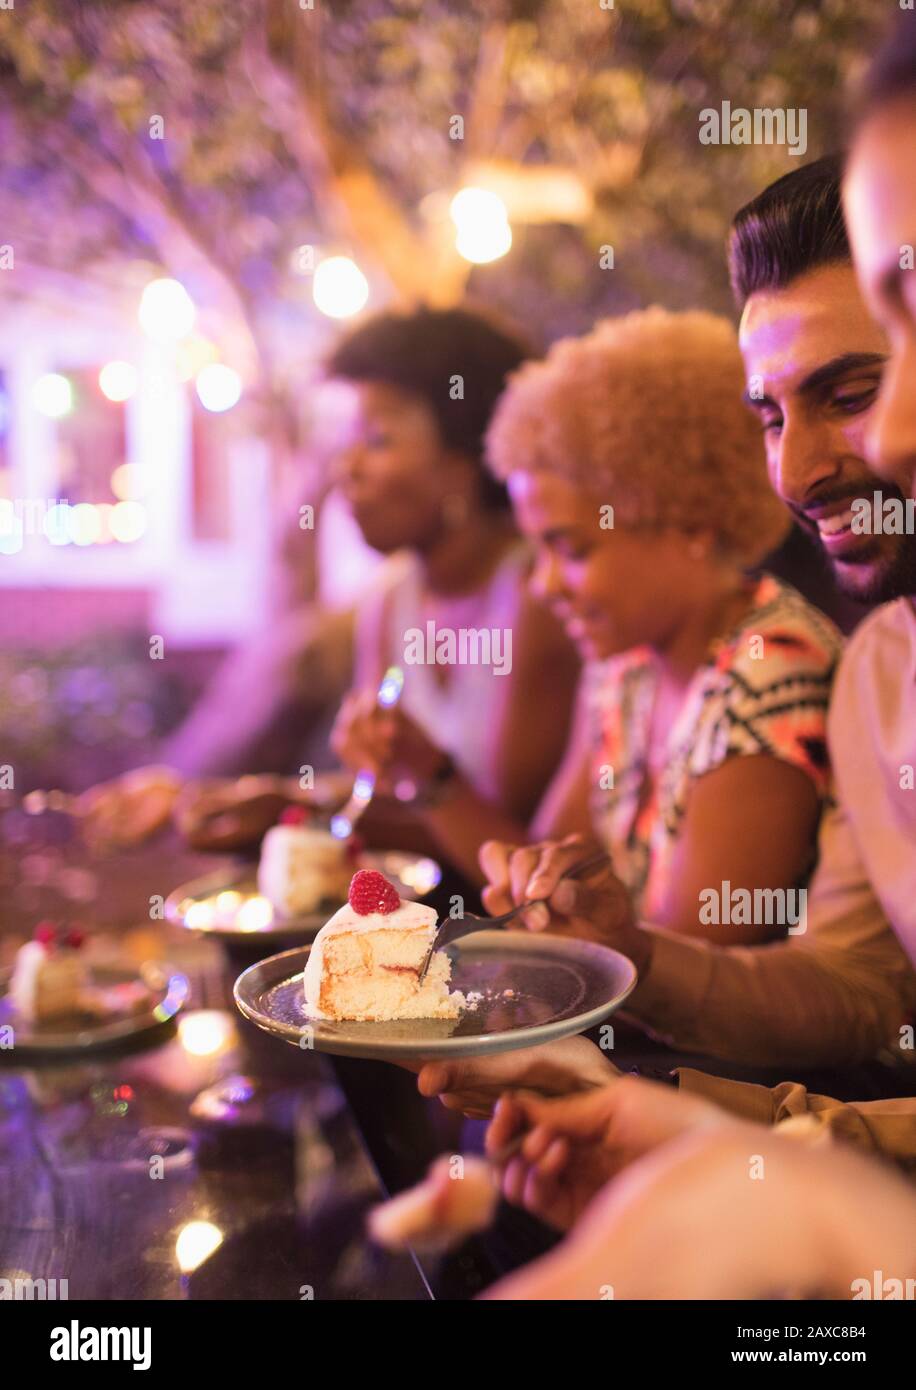 Friends eating dessert at garden party Stock Photo